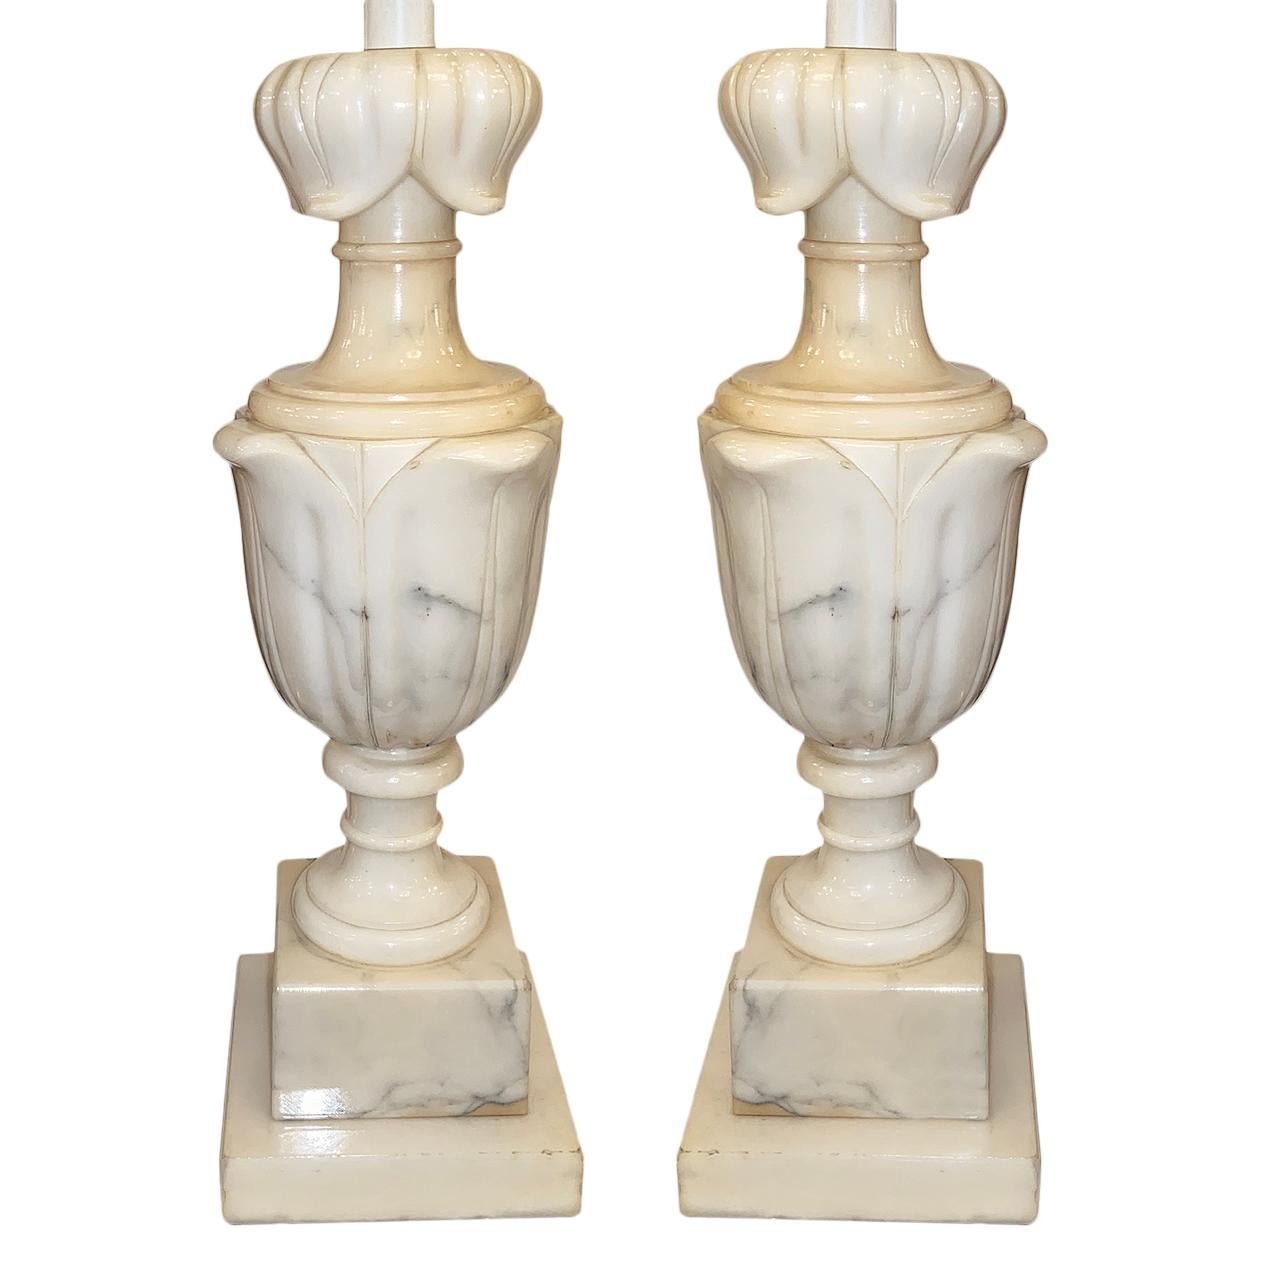 A pair of circa 1920s Italian carved alabaster table lamps with foliage design.

Measurements:
Height of body 14